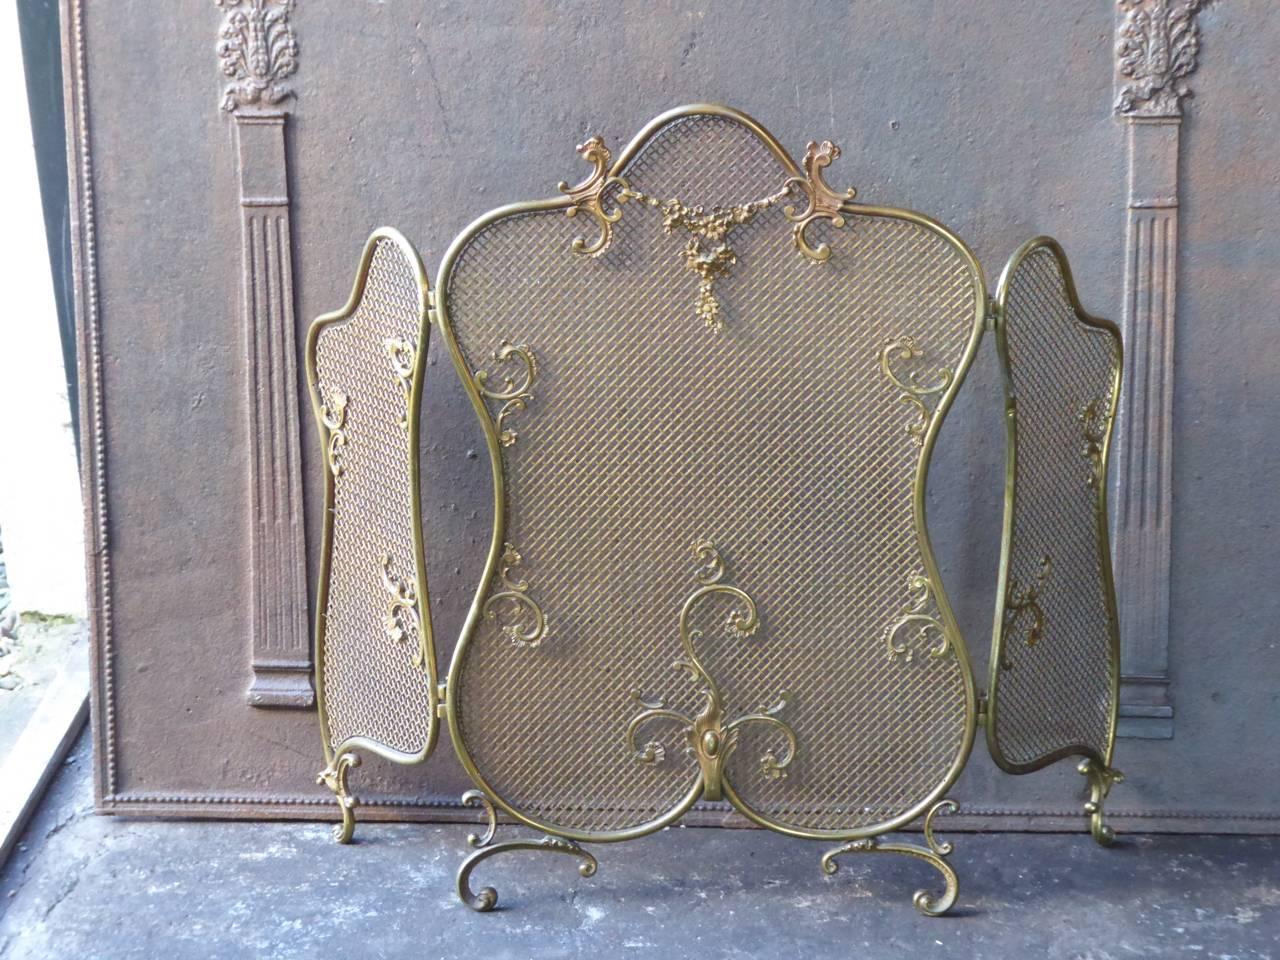 19th century French fireplace screen made of brass.